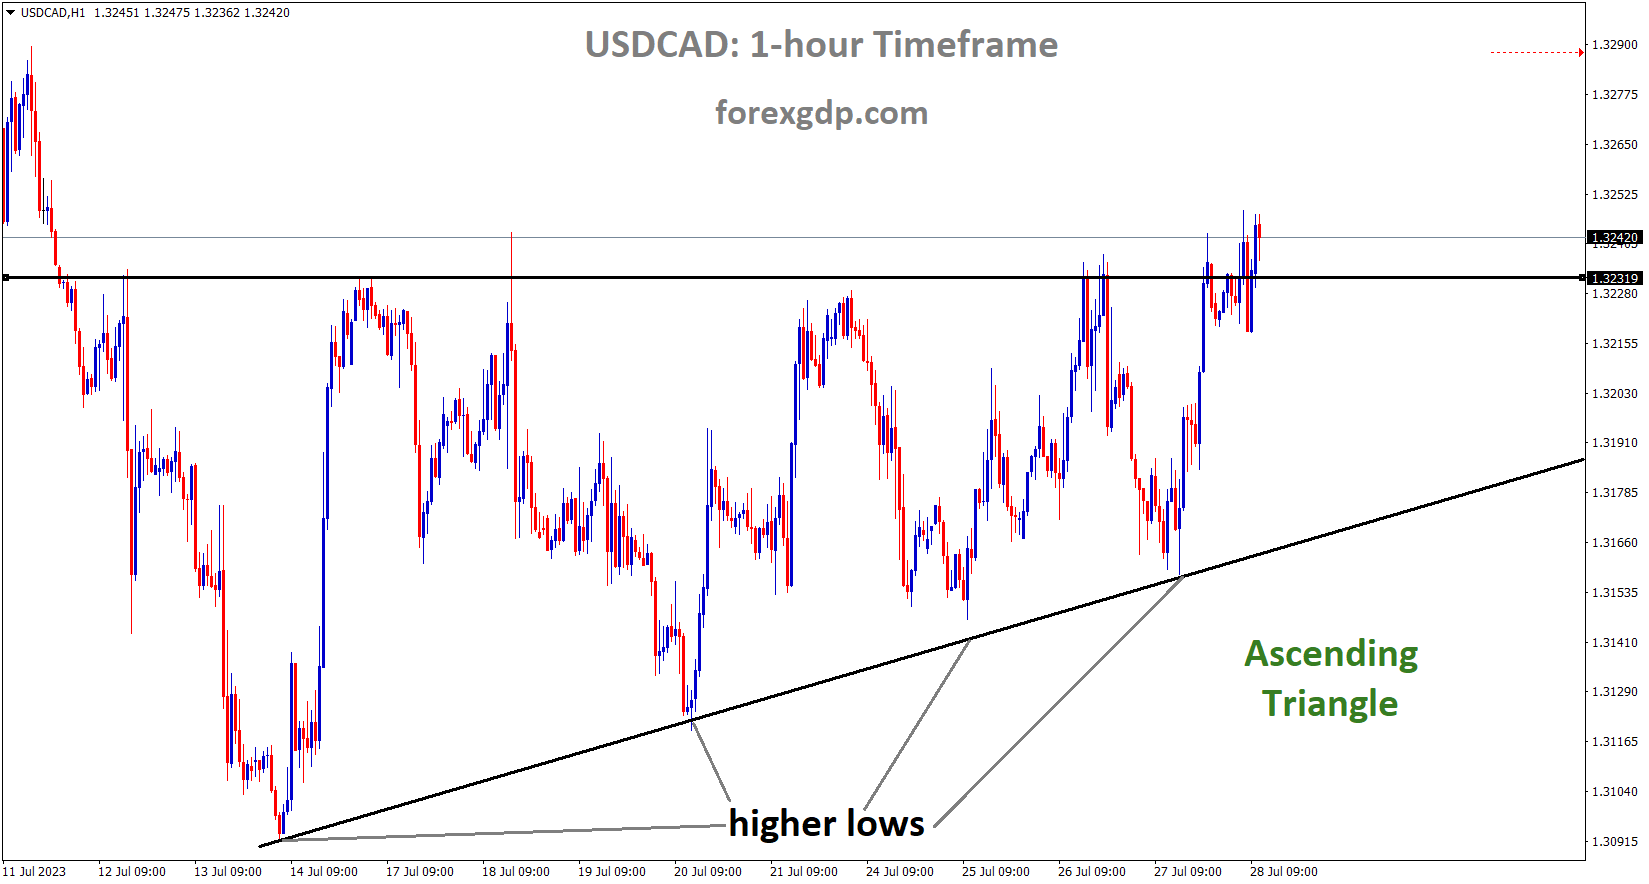 USDCAD is moving in an Ascending triangle pattern and the market has reached the resistance area of the pattern